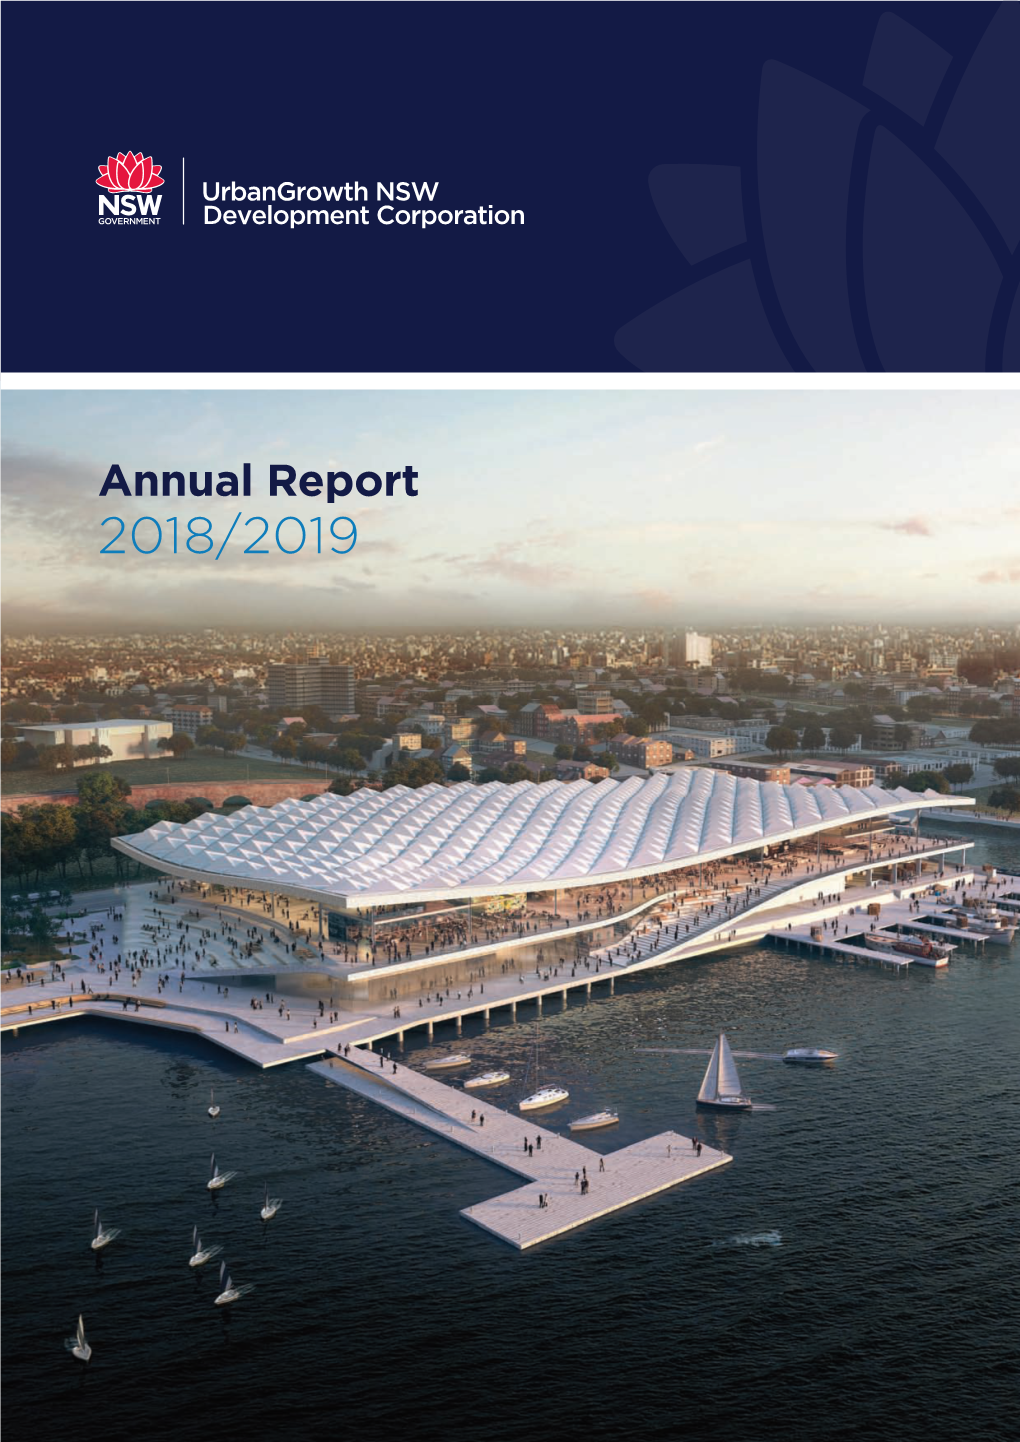 Annual Report 2018/2019 URBANGROWTH NSW - ANNUAL REPORT 2018/2019